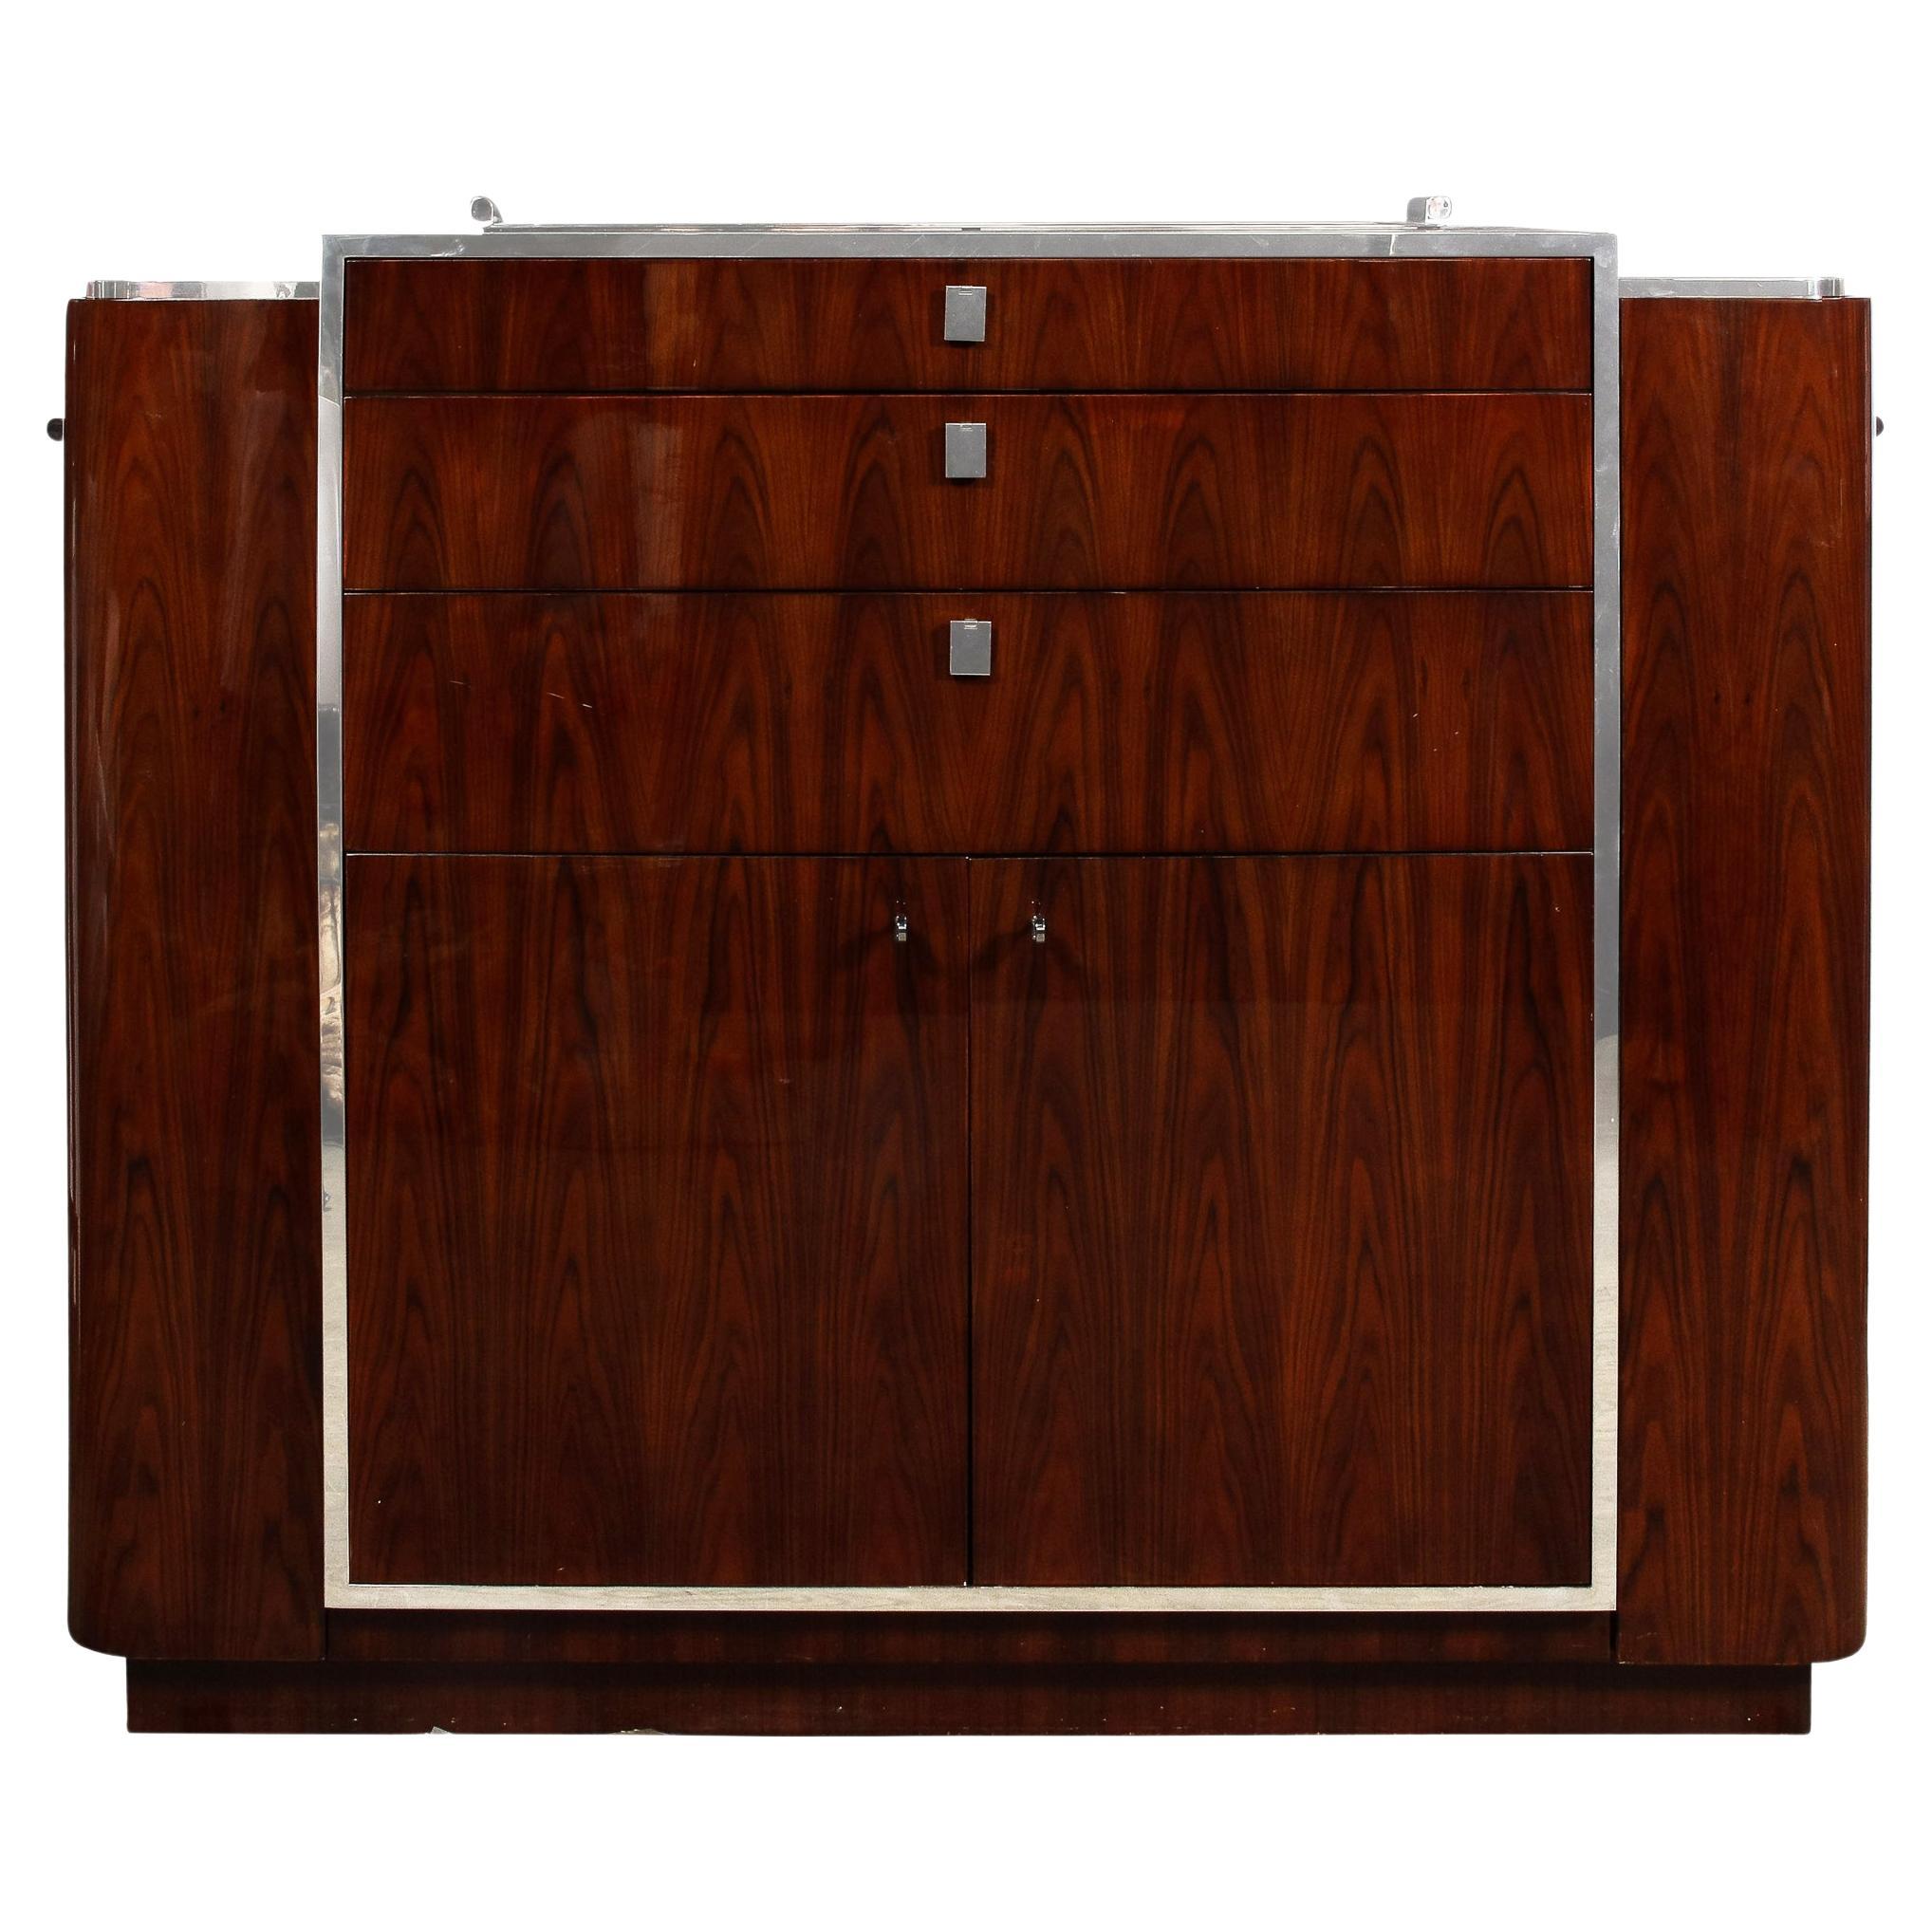 Bookmatched Santos Rosewood & Nickeled Bronze Duke Bar Cabinet by Ralph Lauren